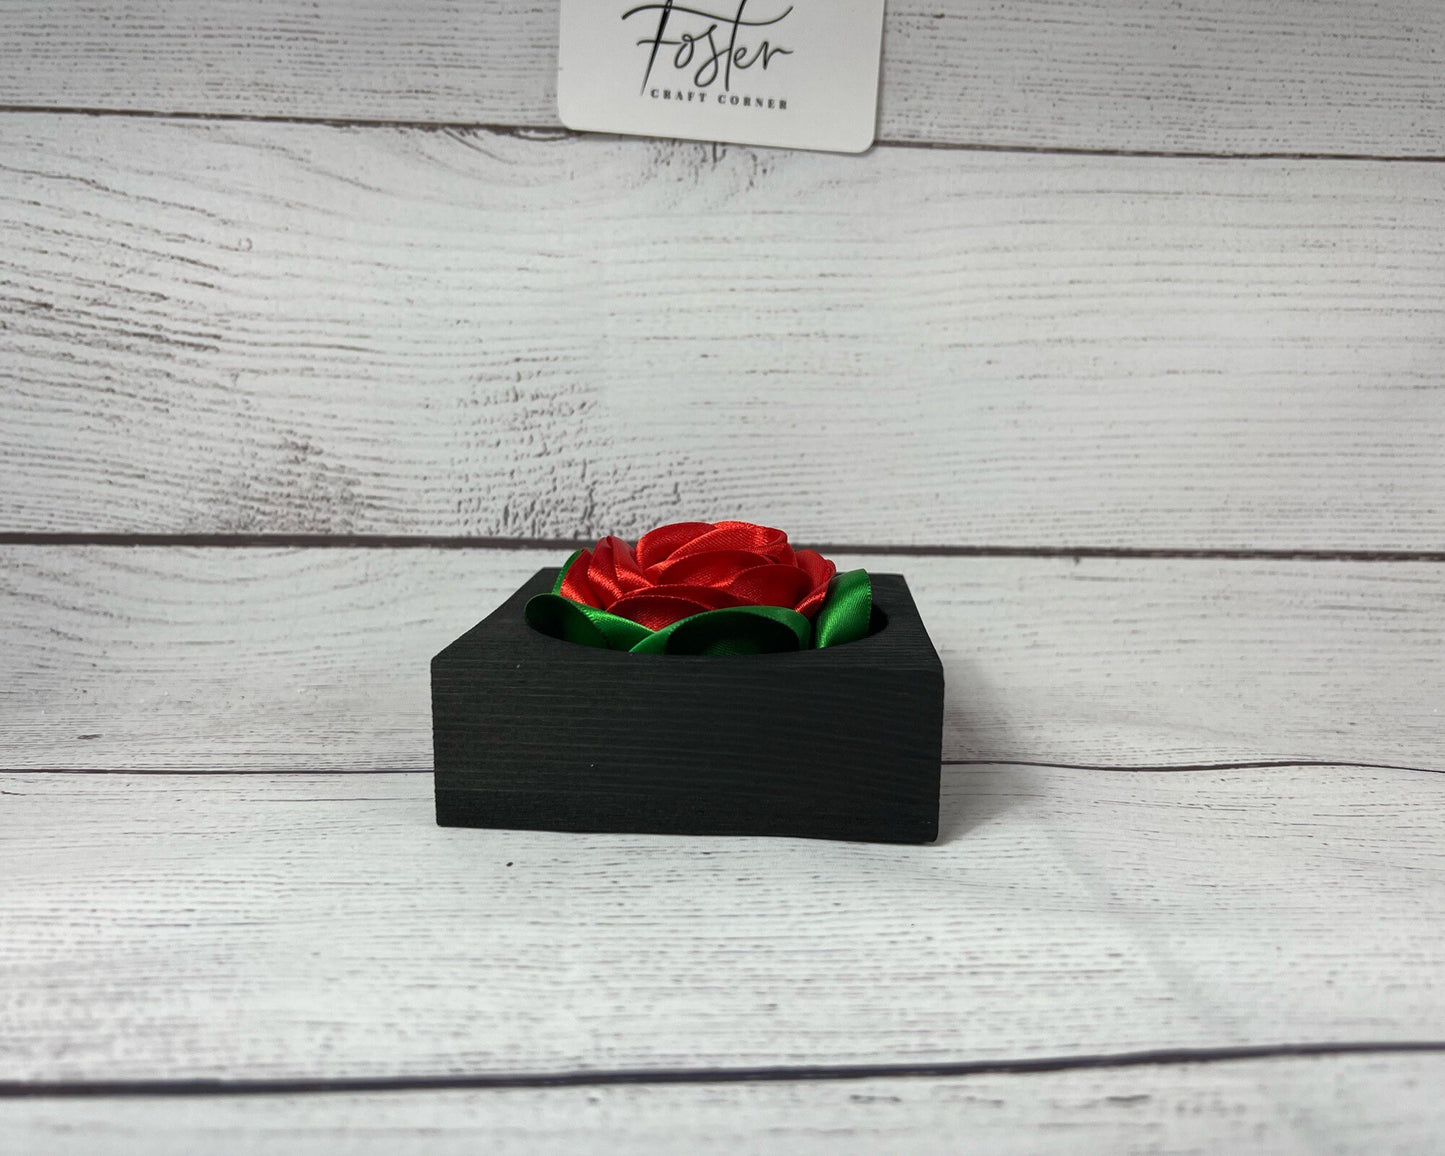 Ribbon Rose Wood Piece - Handmade - Red Rose - Valentine's Day - Love - Sustainable Flower - Unique - Gift Ideas - Stocking Stuffer - Pretty